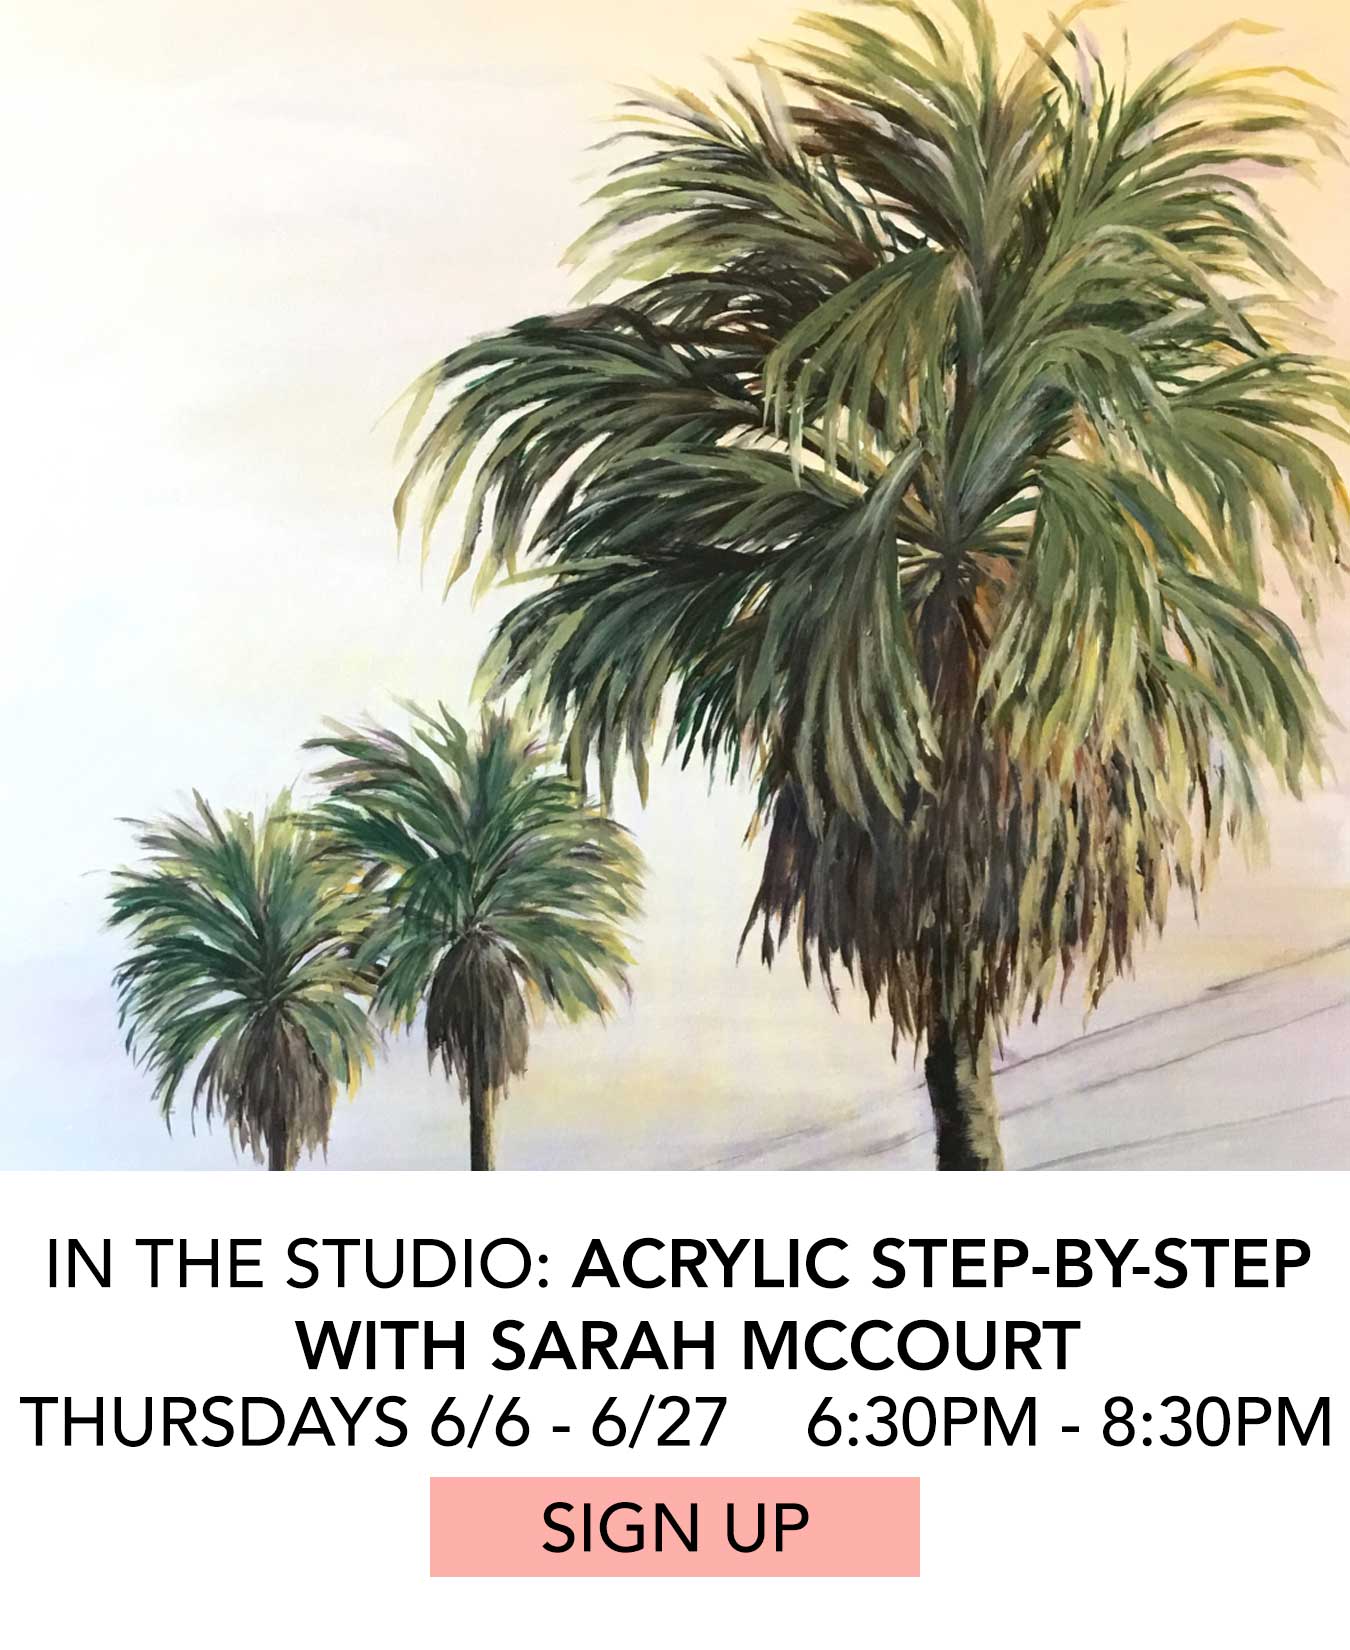 In the Studio: Acrylic Step-by-Step with Sarah McCourt. Thursdays 6/6 to 6/27 from 6:30pm to 8:30pm. Click to Sign Up.